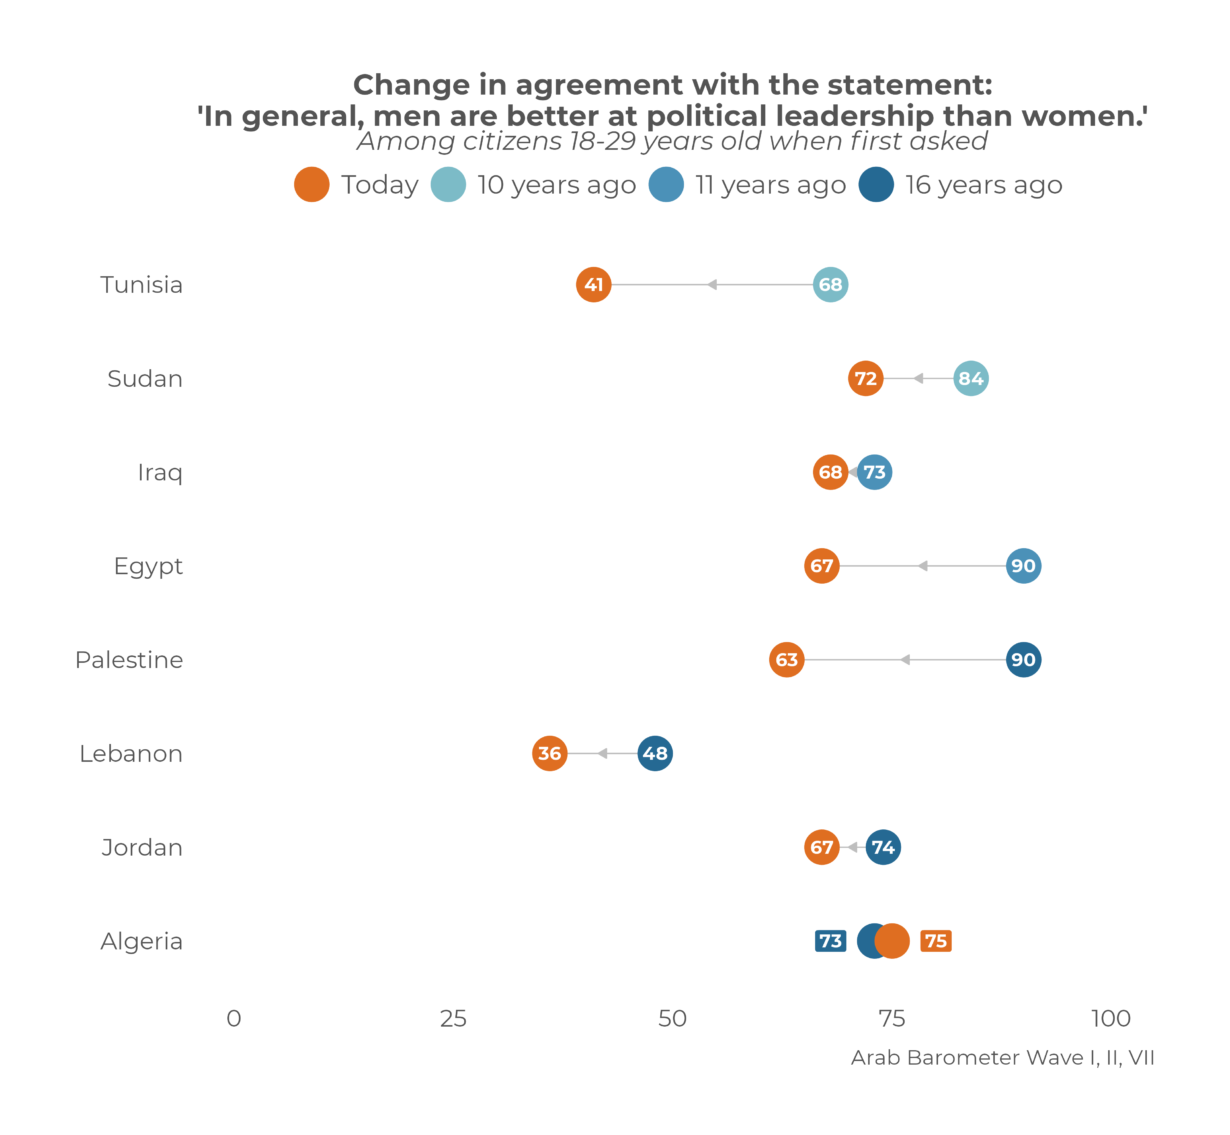 Female Political Participation Inspires Confidence In Female Political Leadership in MENA